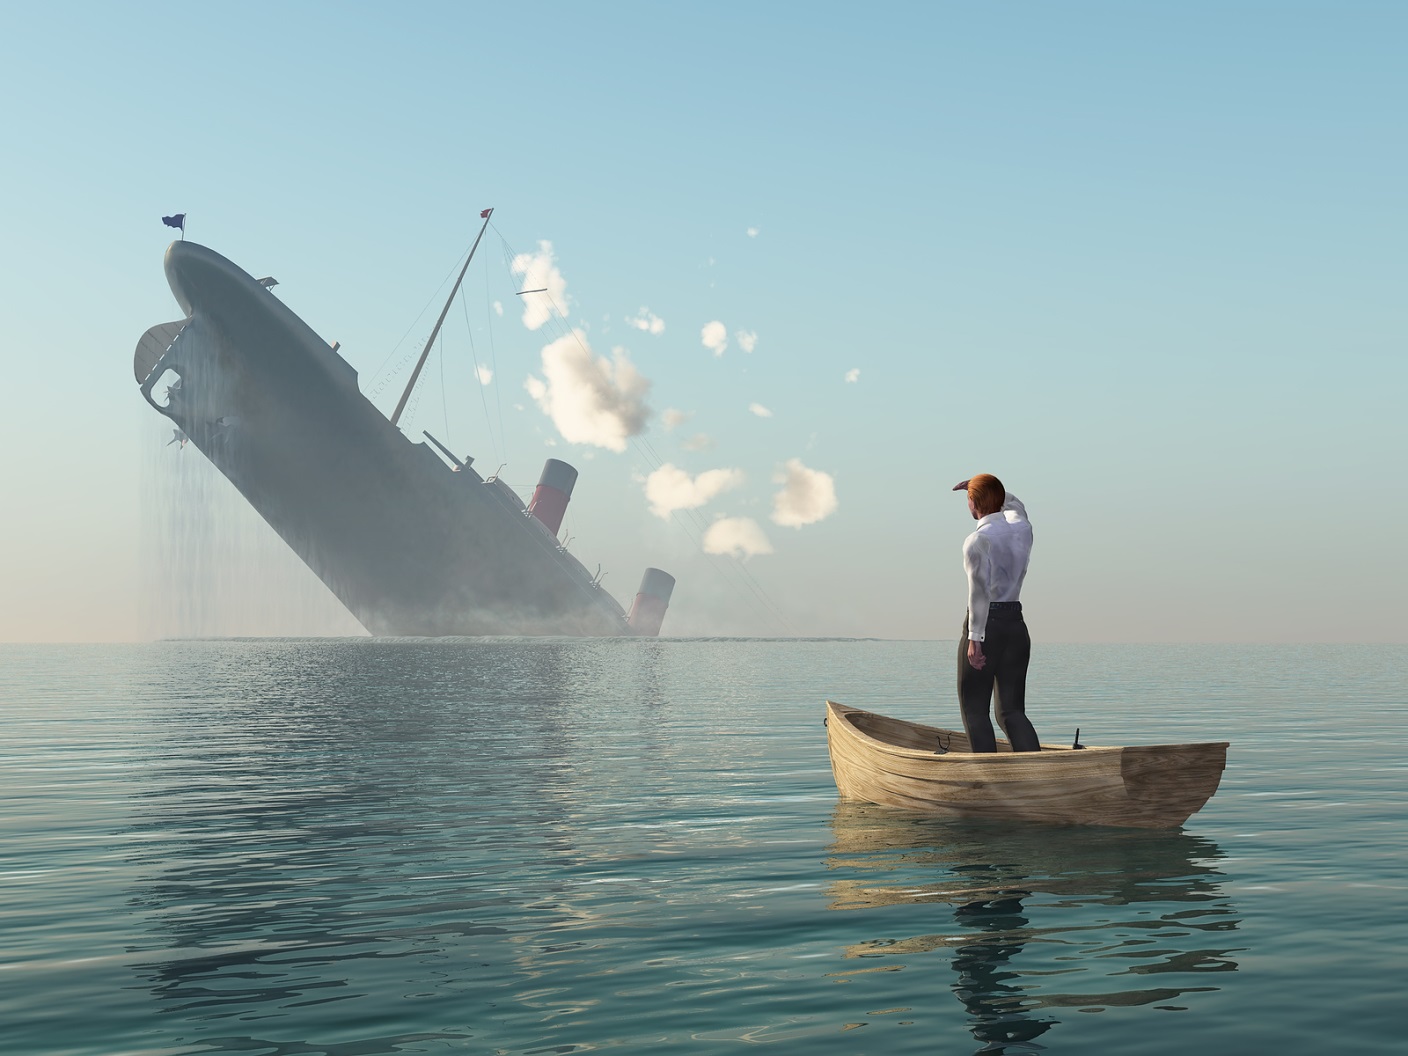 More Holes In The Boat: Stock Market Not Ready To Sink Yet.